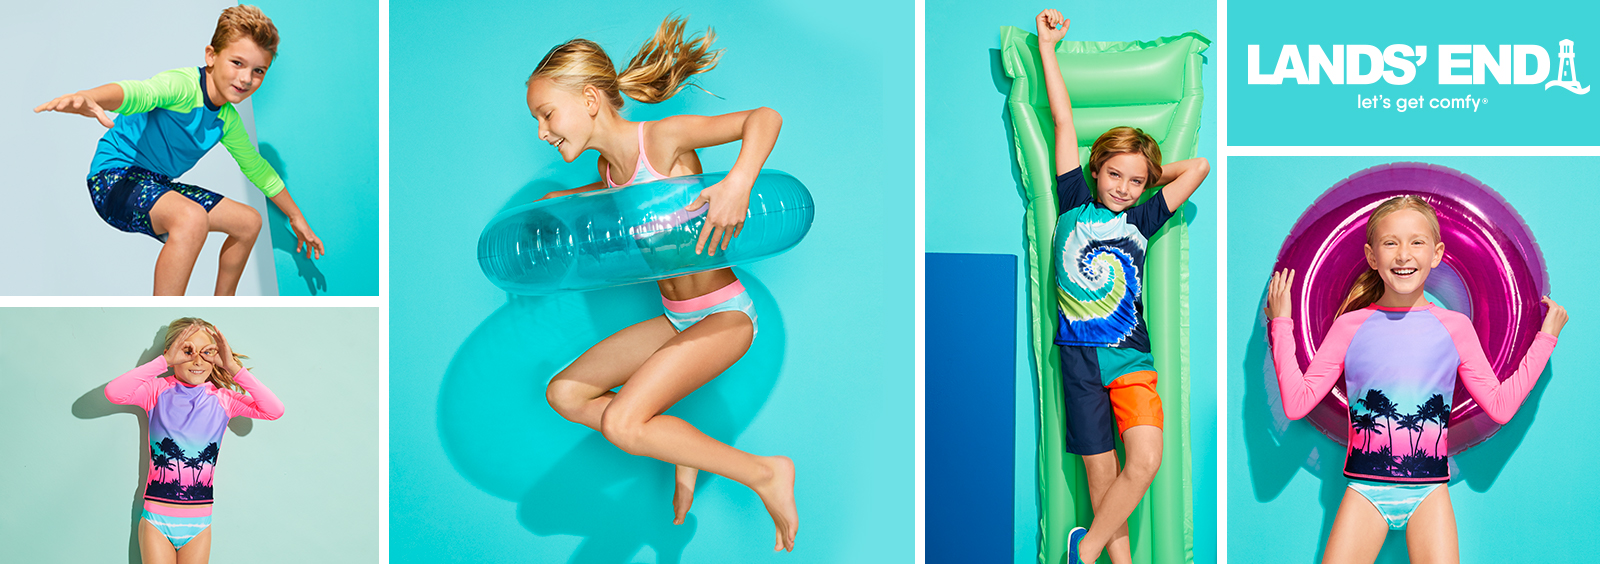 5 Important Things to Look for When Buying Your Child’s Swimsuits